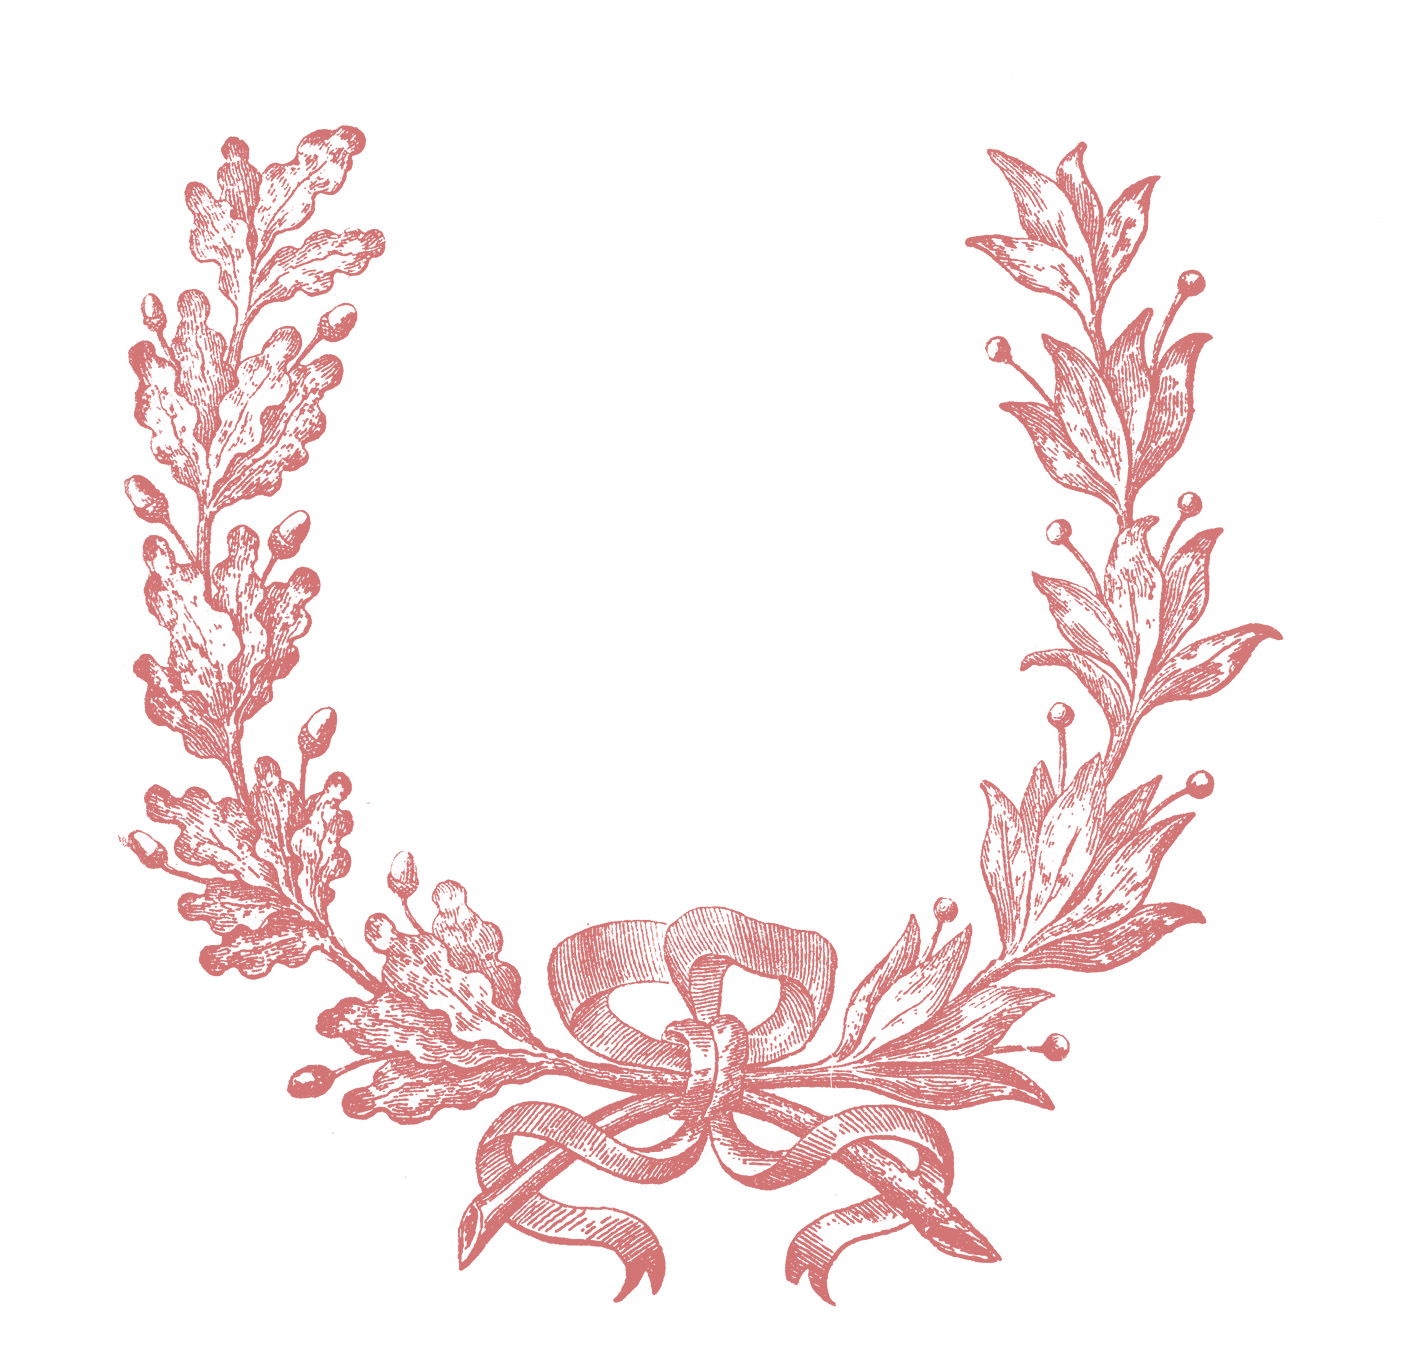 Vintage Clip Art - French Wreath Engraving - The Graphics Fairy